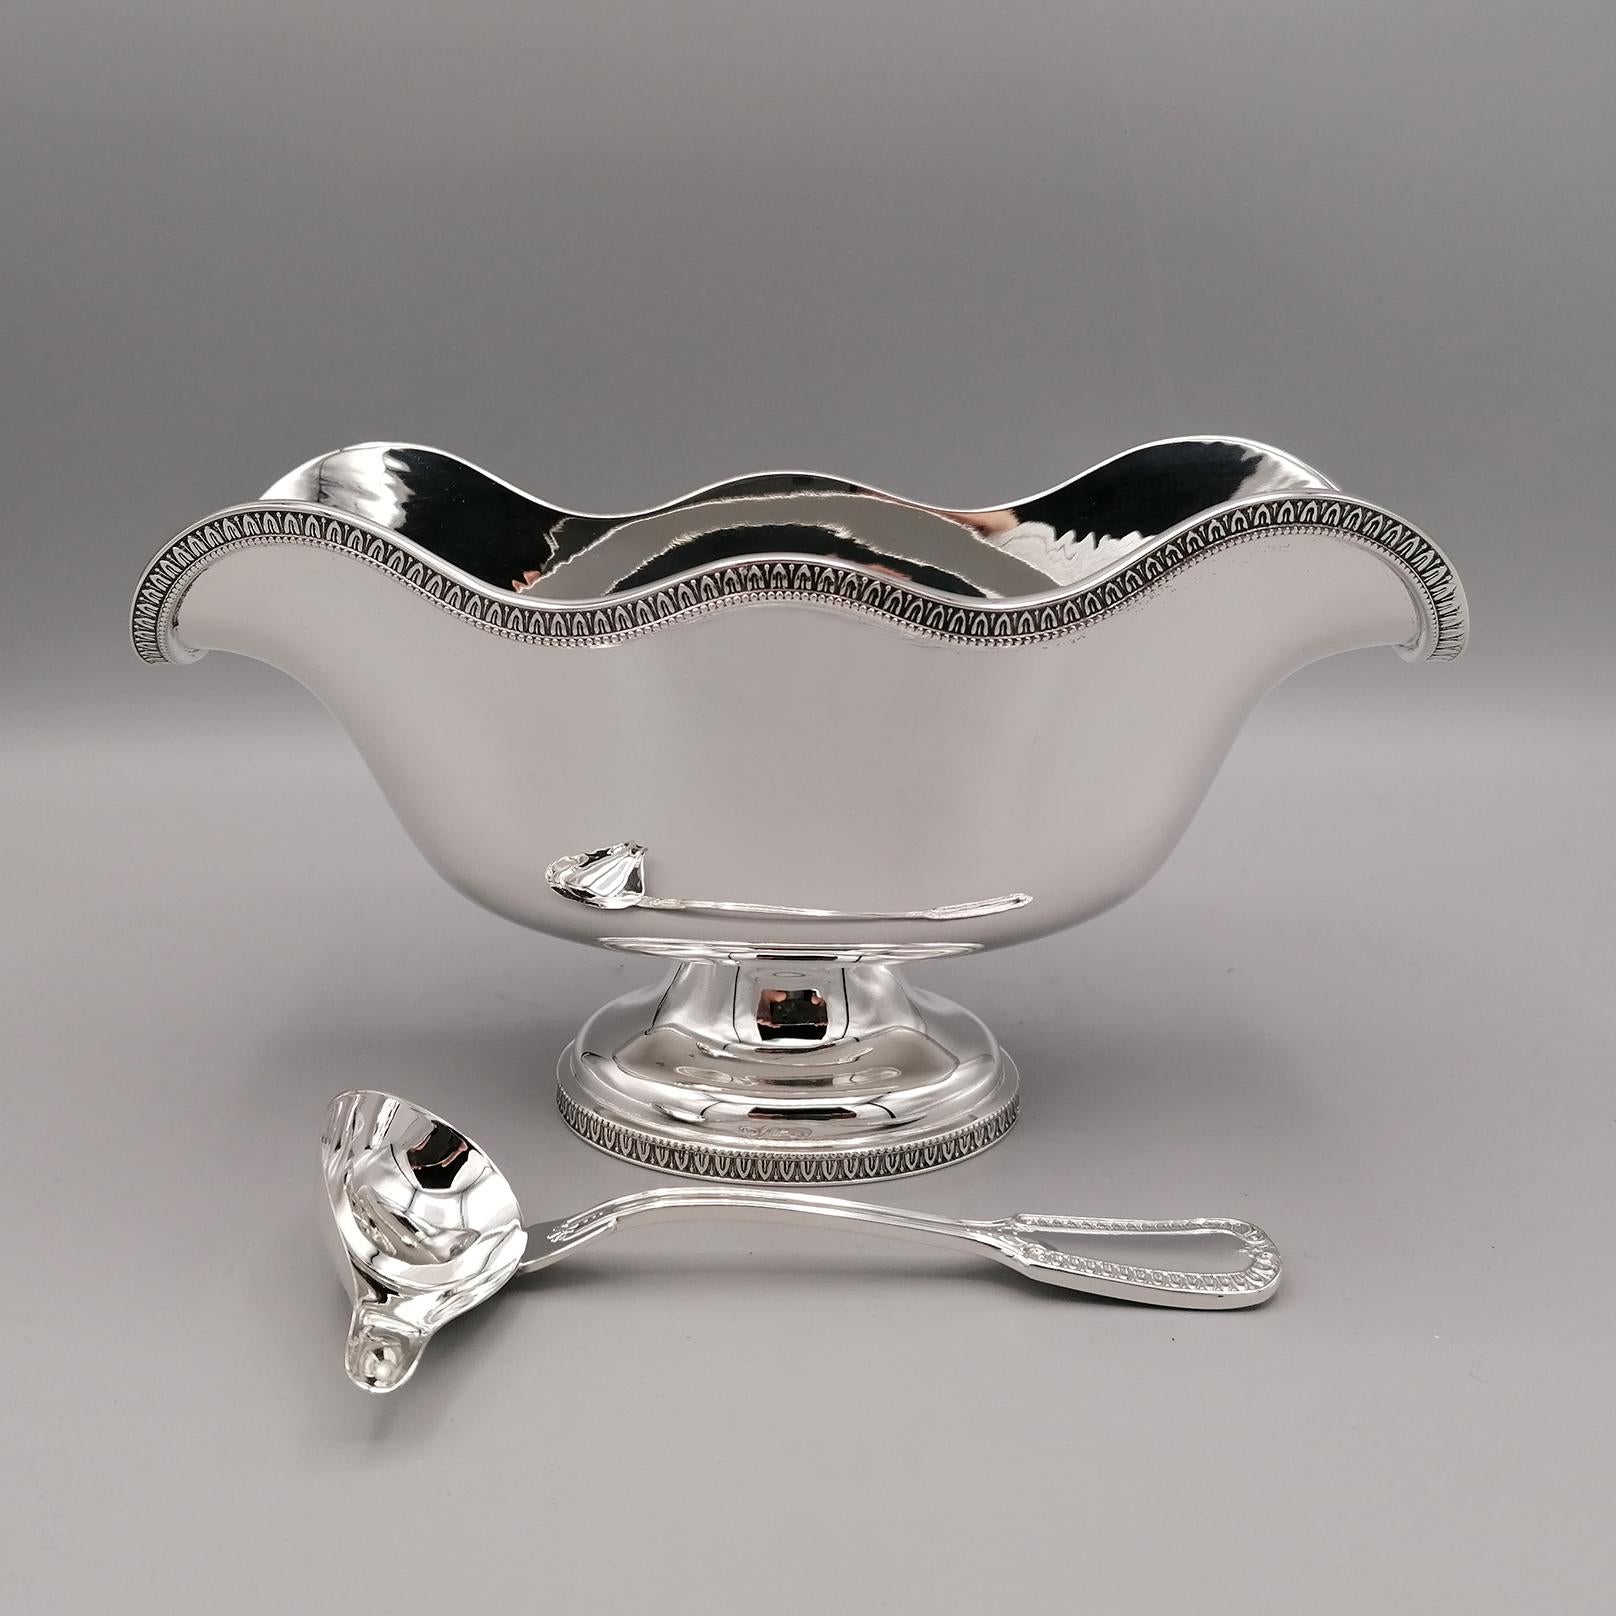 Important Empire style souce boat in 800 silver made in Italy at the end of the 20th century entirely by hand. 

The Empire style is a current of Neoclassicism that affected 19th century architecture, furniture, decorative arts and visual arts. It